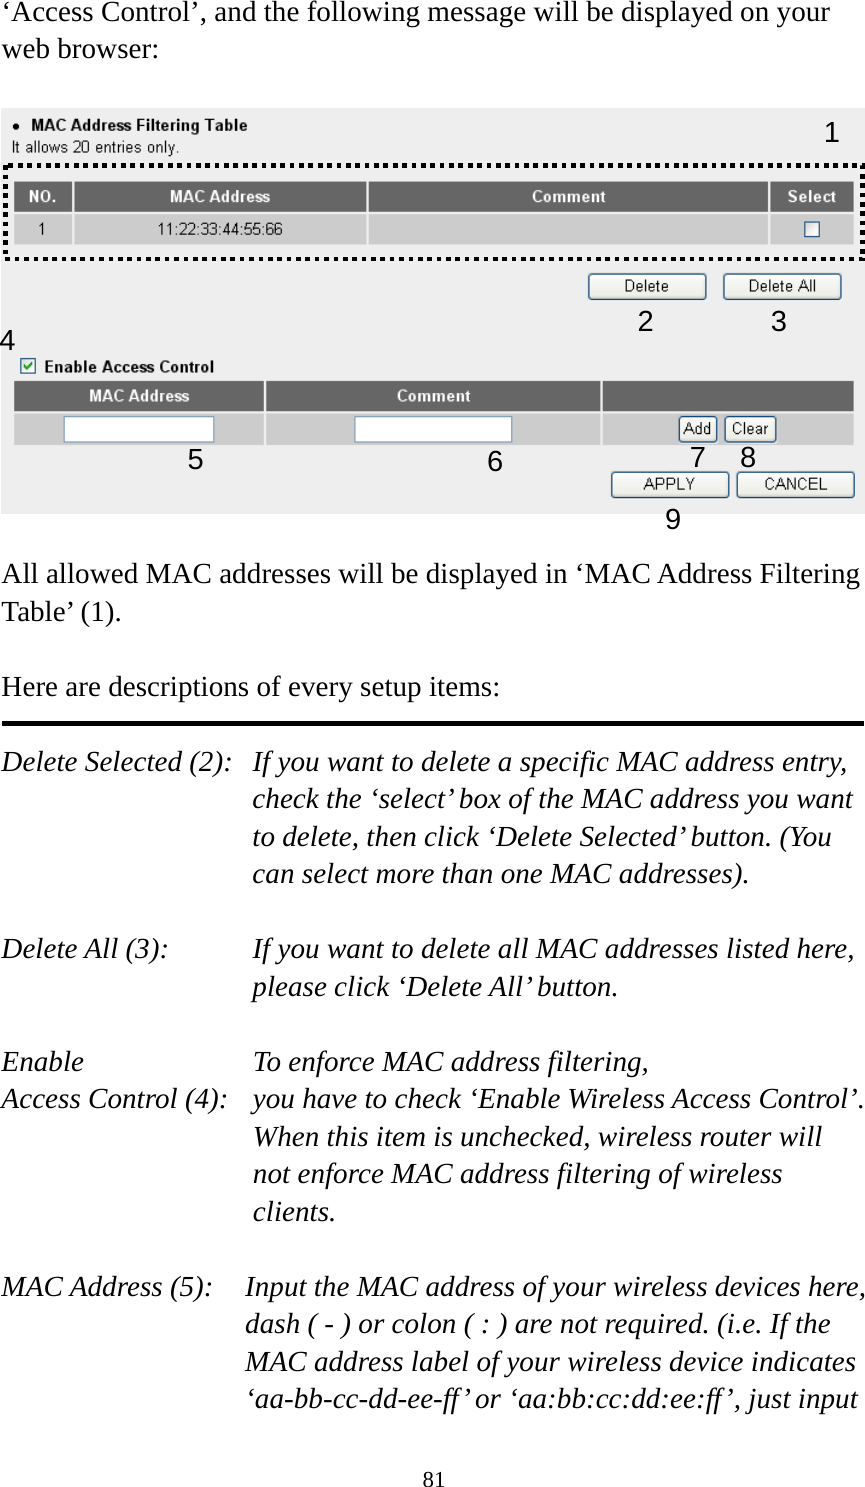 81 ‘Access Control’, and the following message will be displayed on your web browser:    All allowed MAC addresses will be displayed in ‘MAC Address Filtering Table’ (1).    Here are descriptions of every setup items:  Delete Selected (2):   If you want to delete a specific MAC address entry, check the ‘select’ box of the MAC address you want to delete, then click ‘Delete Selected’ button. (You can select more than one MAC addresses).  Delete All (3):    If you want to delete all MAC addresses listed here, please click ‘Delete All’ button.  Enable      To enforce MAC address filtering, Access Control (4):   you have to check ‘Enable Wireless Access Control’. When this item is unchecked, wireless router will not enforce MAC address filtering of wireless clients.  MAC Address (5):    Input the MAC address of your wireless devices here, dash ( - ) or colon ( : ) are not required. (i.e. If the MAC address label of your wireless device indicates ‘aa-bb-cc-dd-ee-ff’ or ‘aa:bb:cc:dd:ee:ff’, just input 123 4 67 8 95 